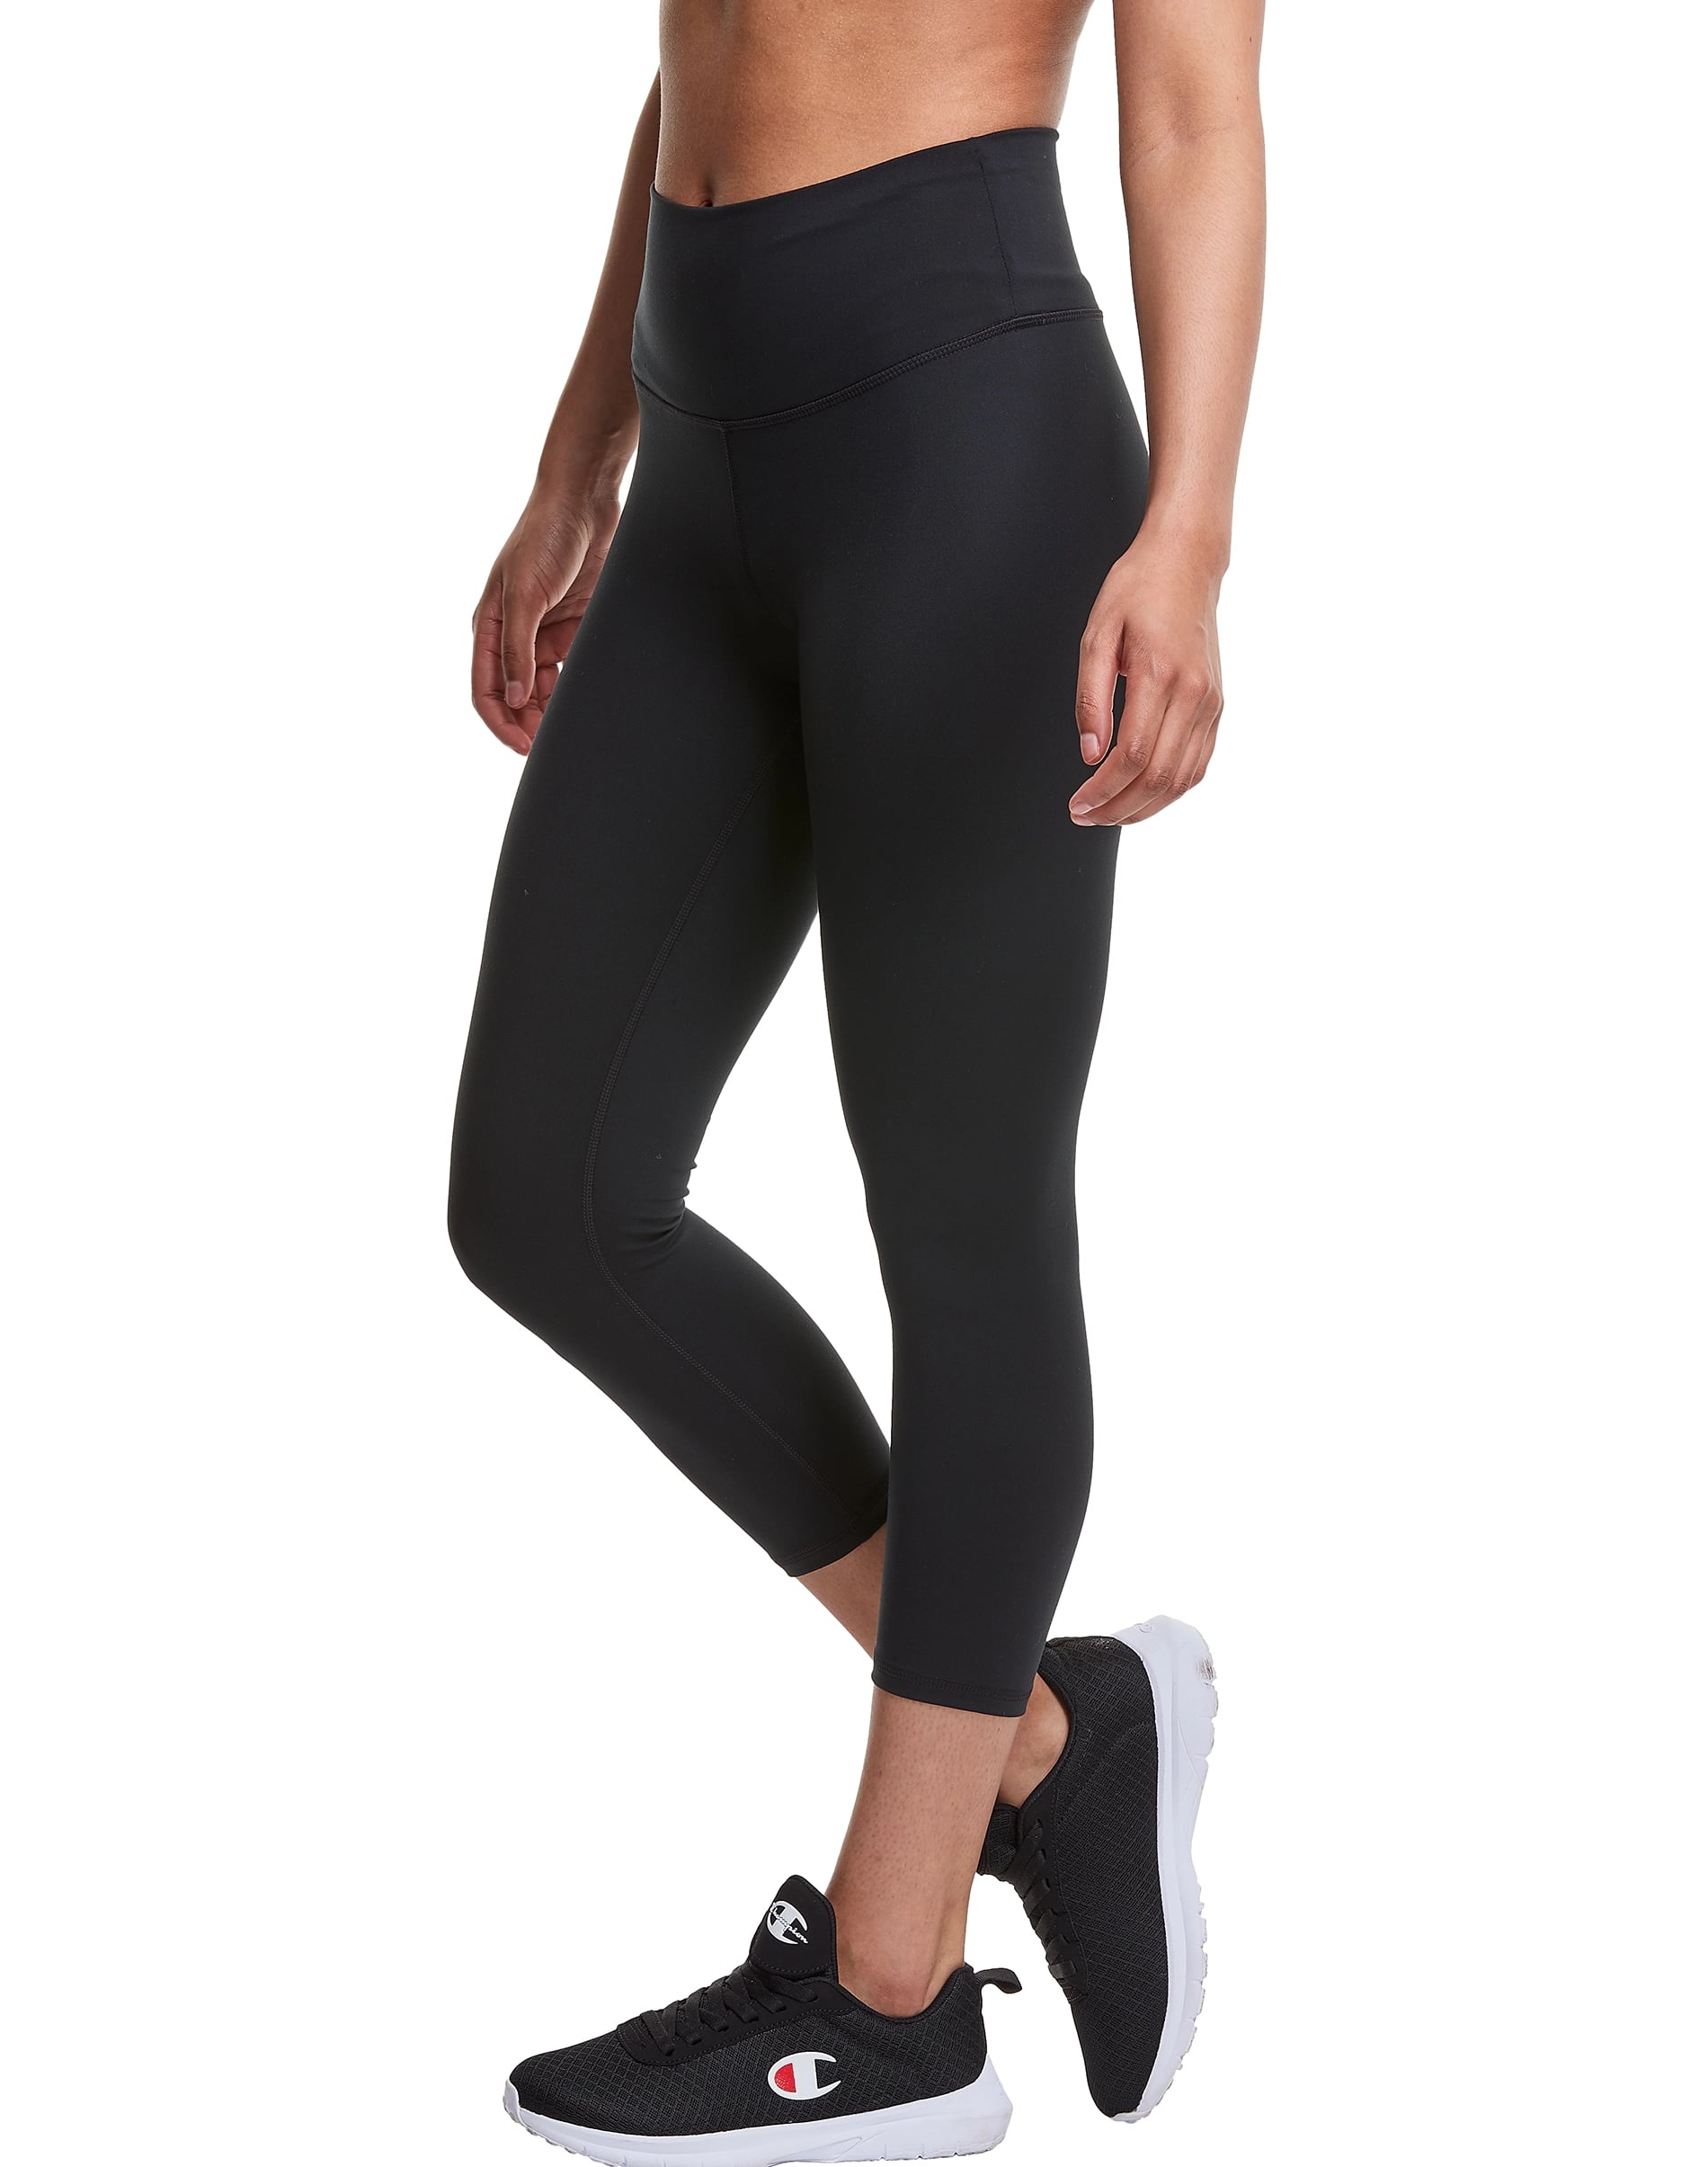 Best Cropped Champion Leggings: Soft Touch Crop Tights, 8 of the Best  Champion Leggings For Your Active Lifestyle